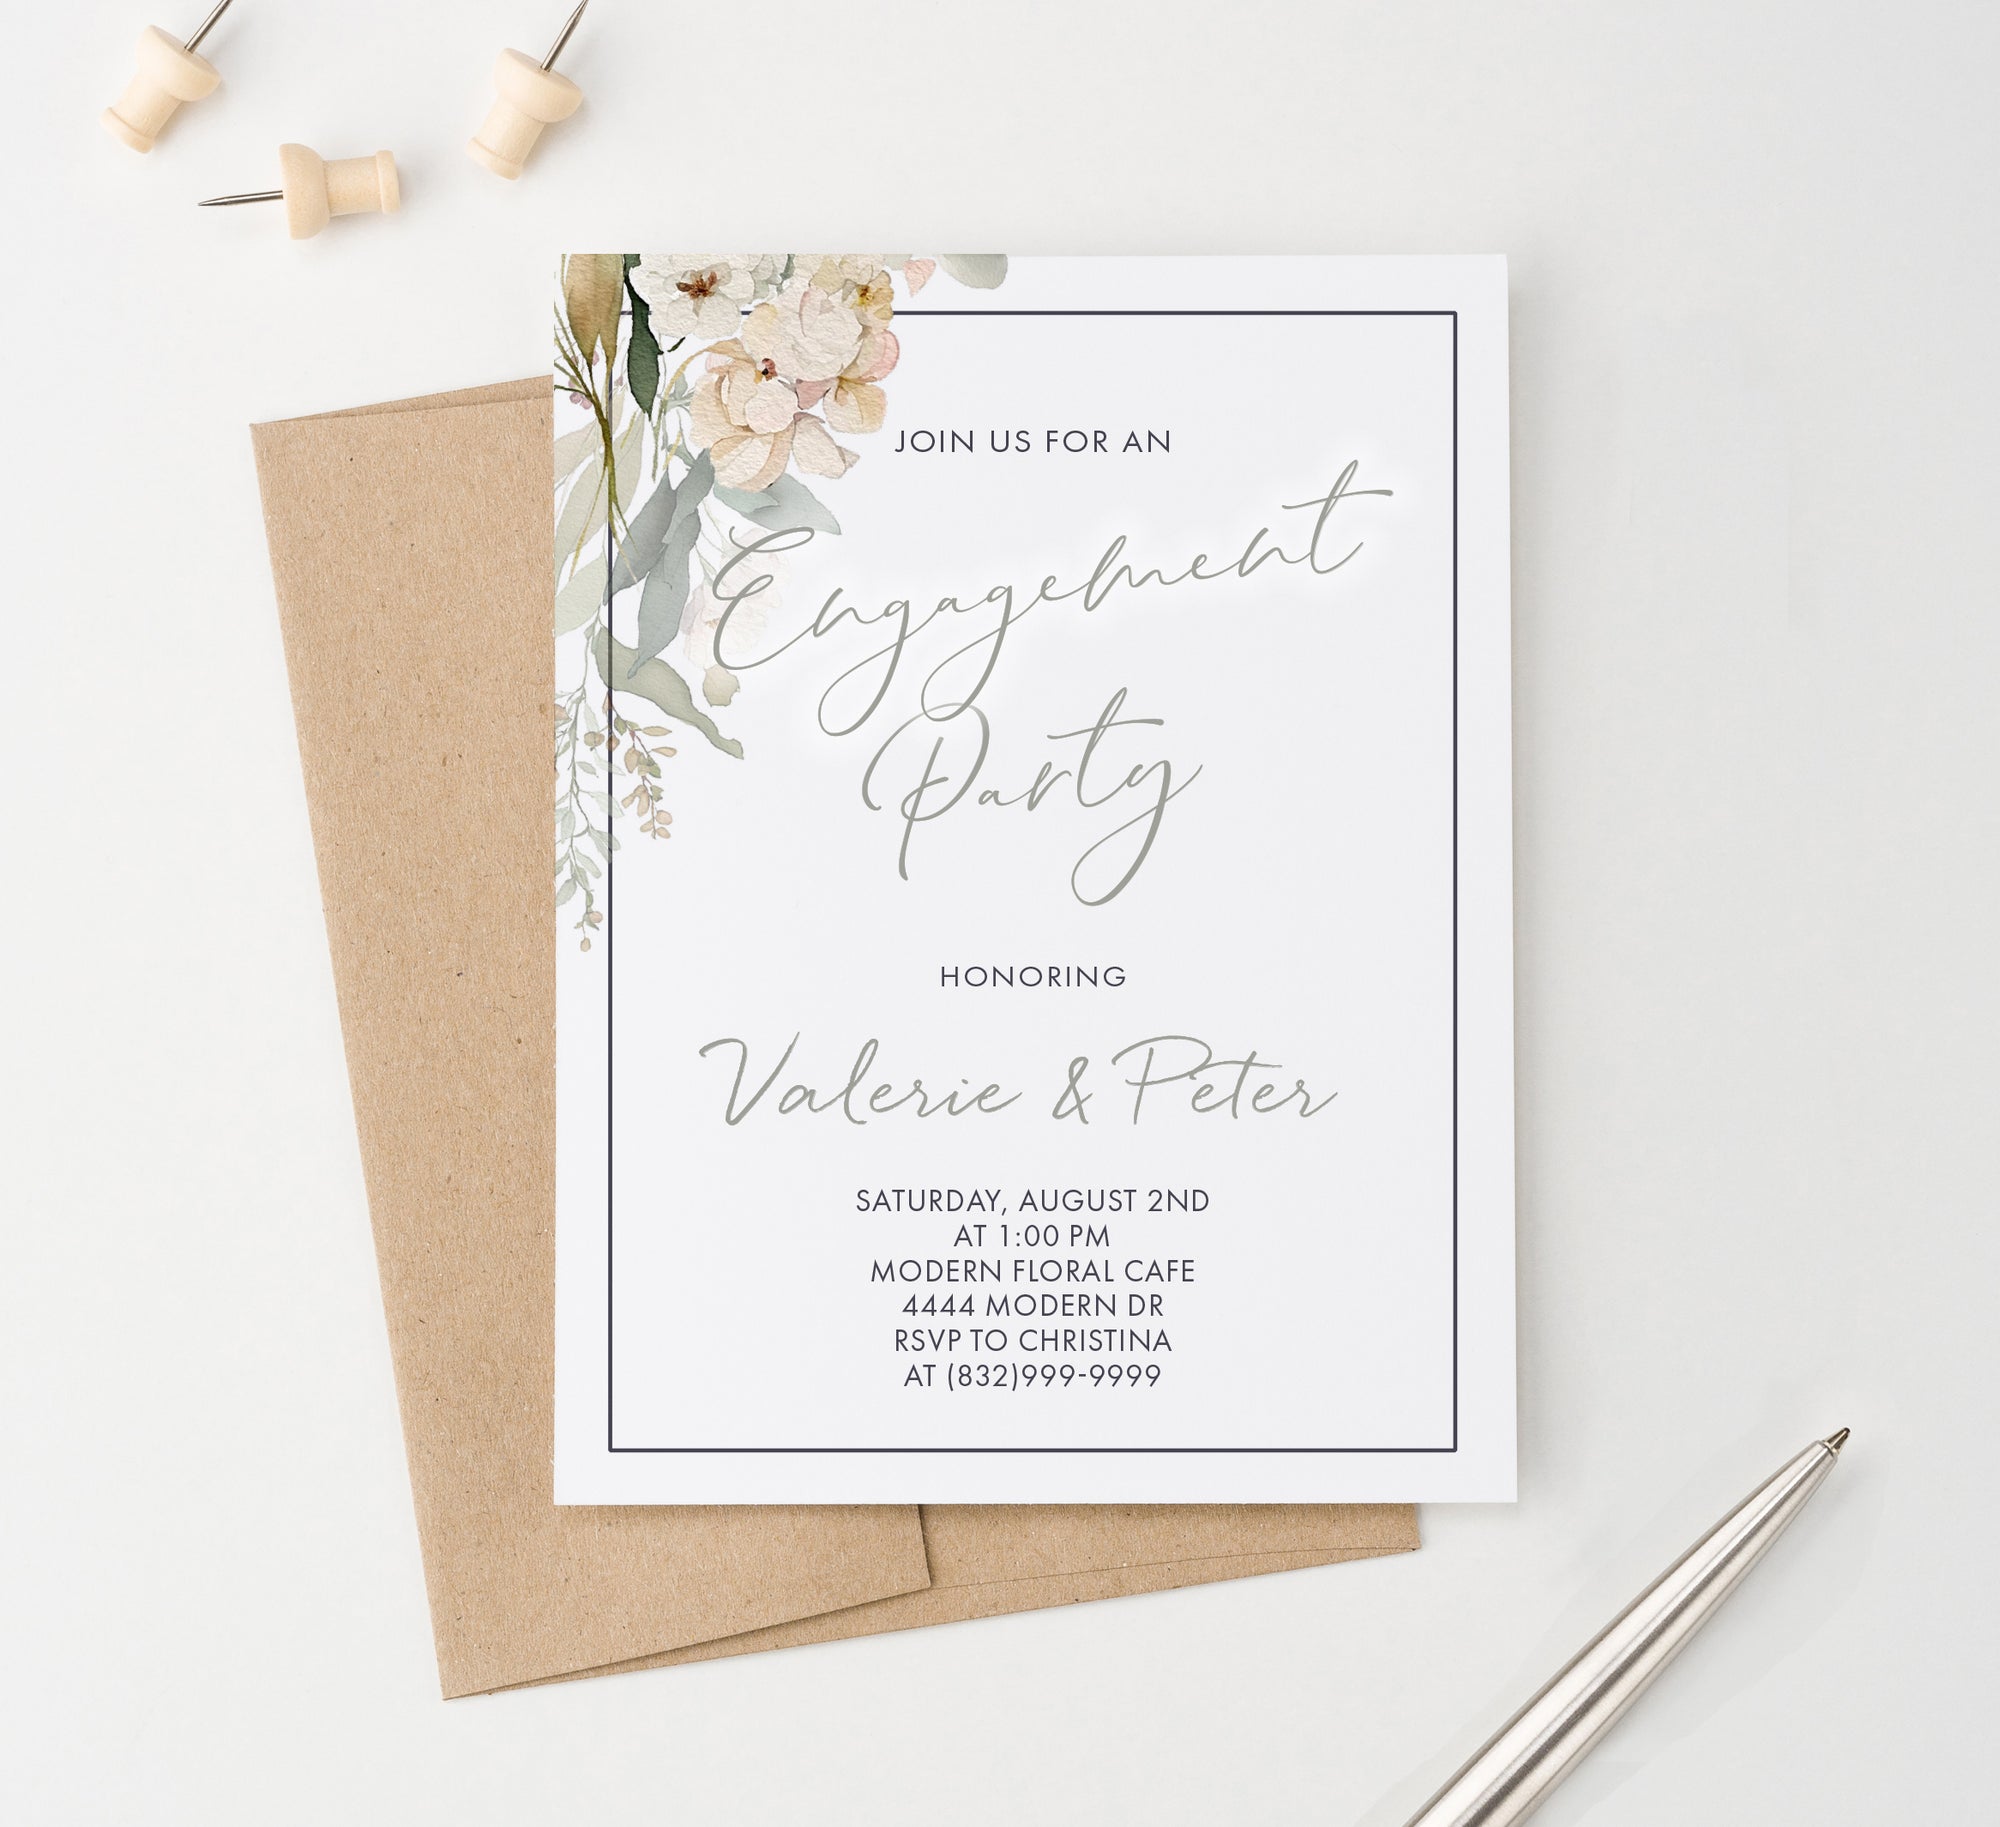 Classy Engagement Invitations With Florals